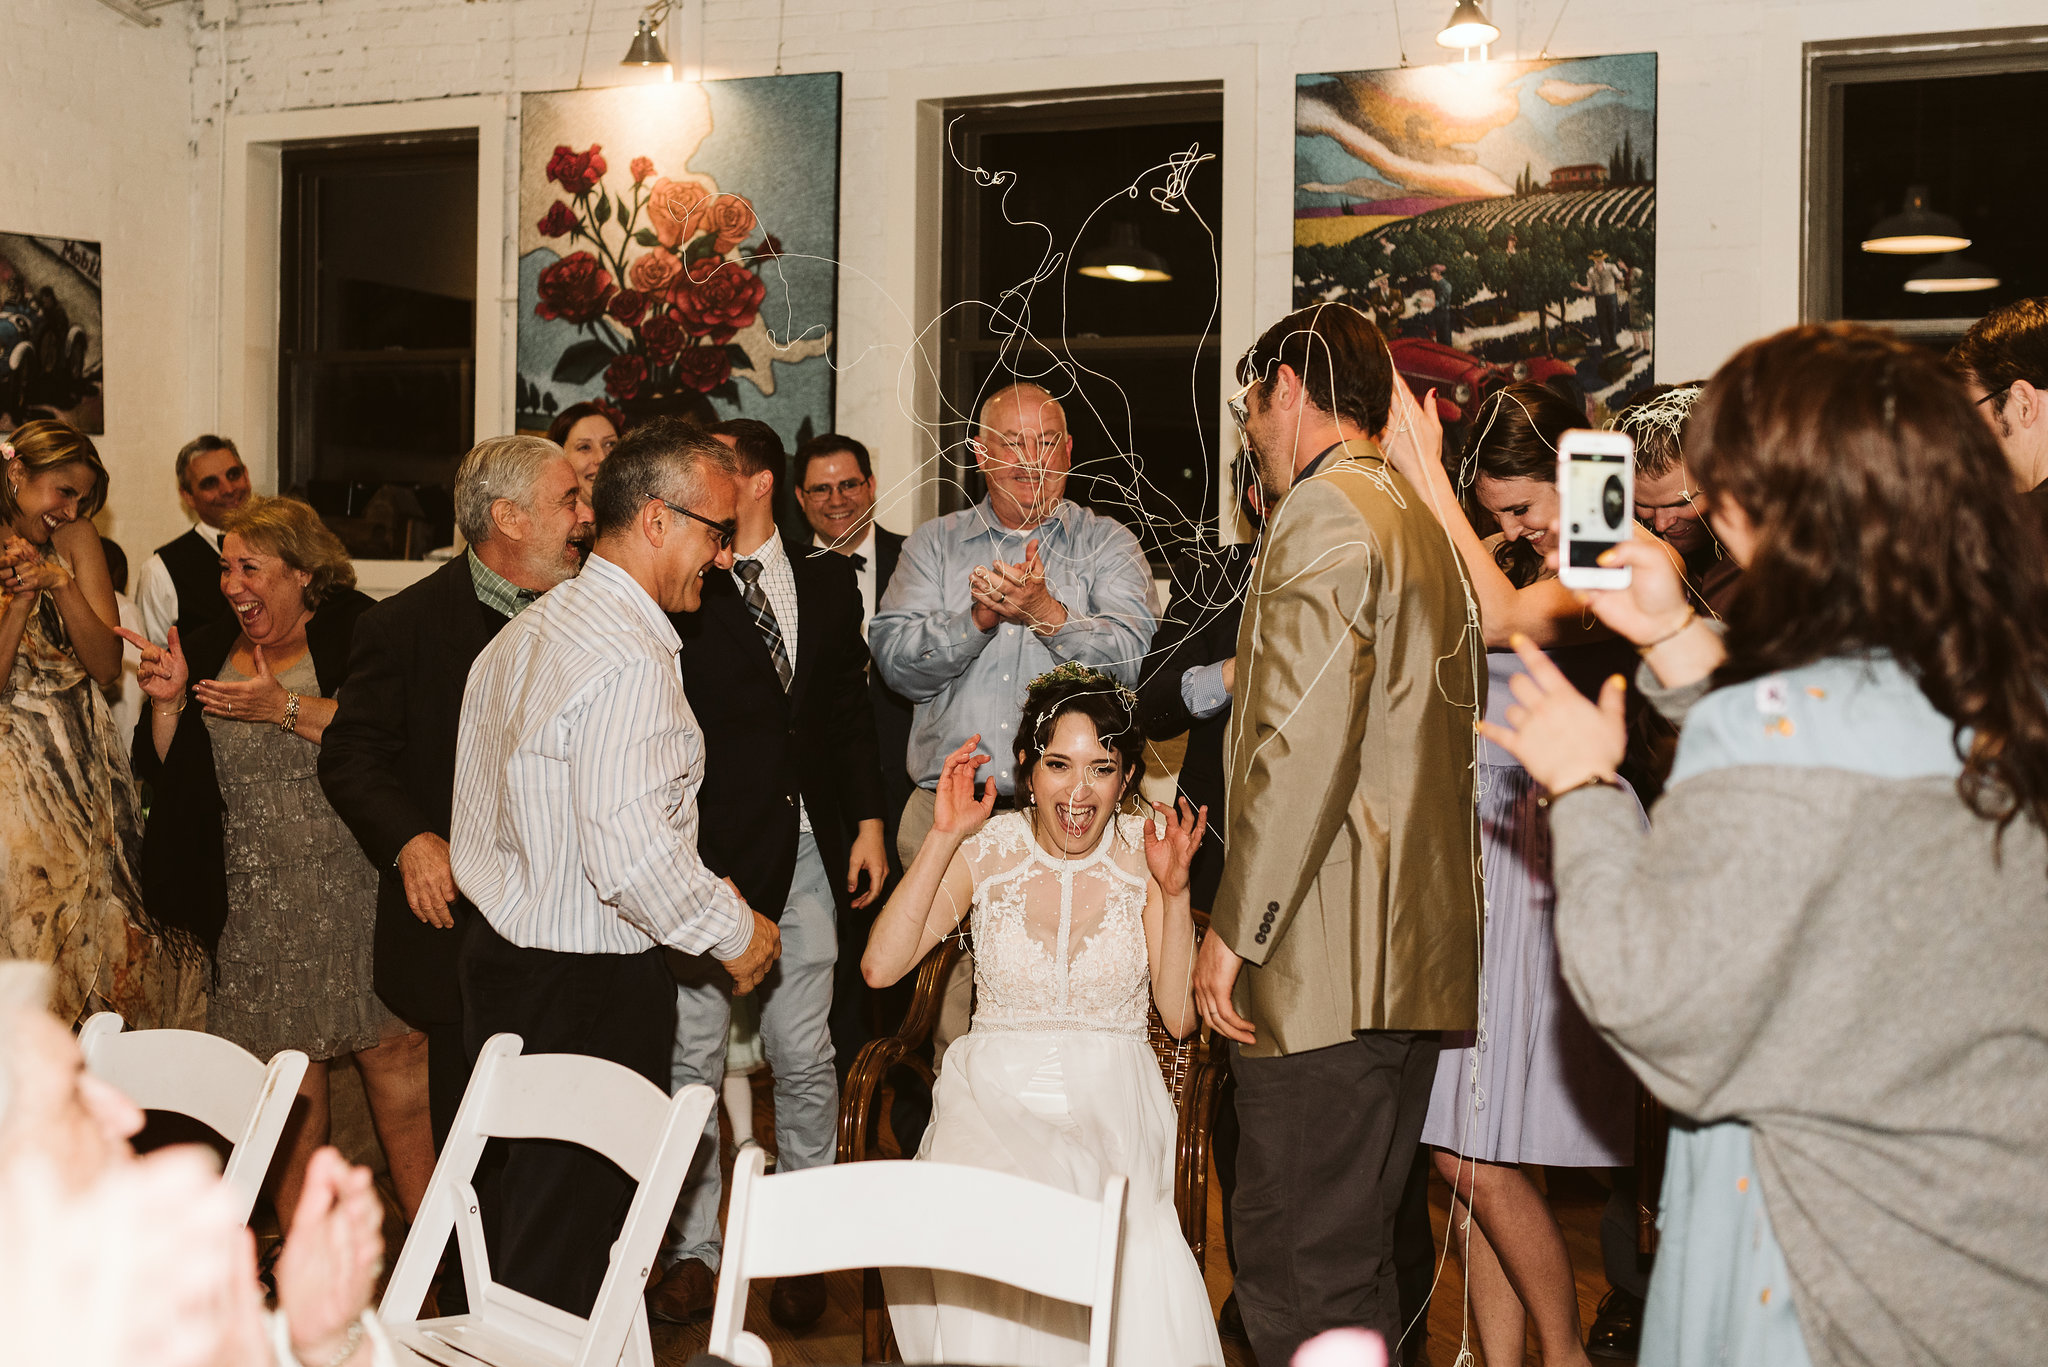  Baltimore, Maryland Wedding Photographer, Hampden, Eco-Friendly, Green, The Elm, Simple and Classic, Vintage, Fun Photo of Bride Being Sprayed with Silly String 